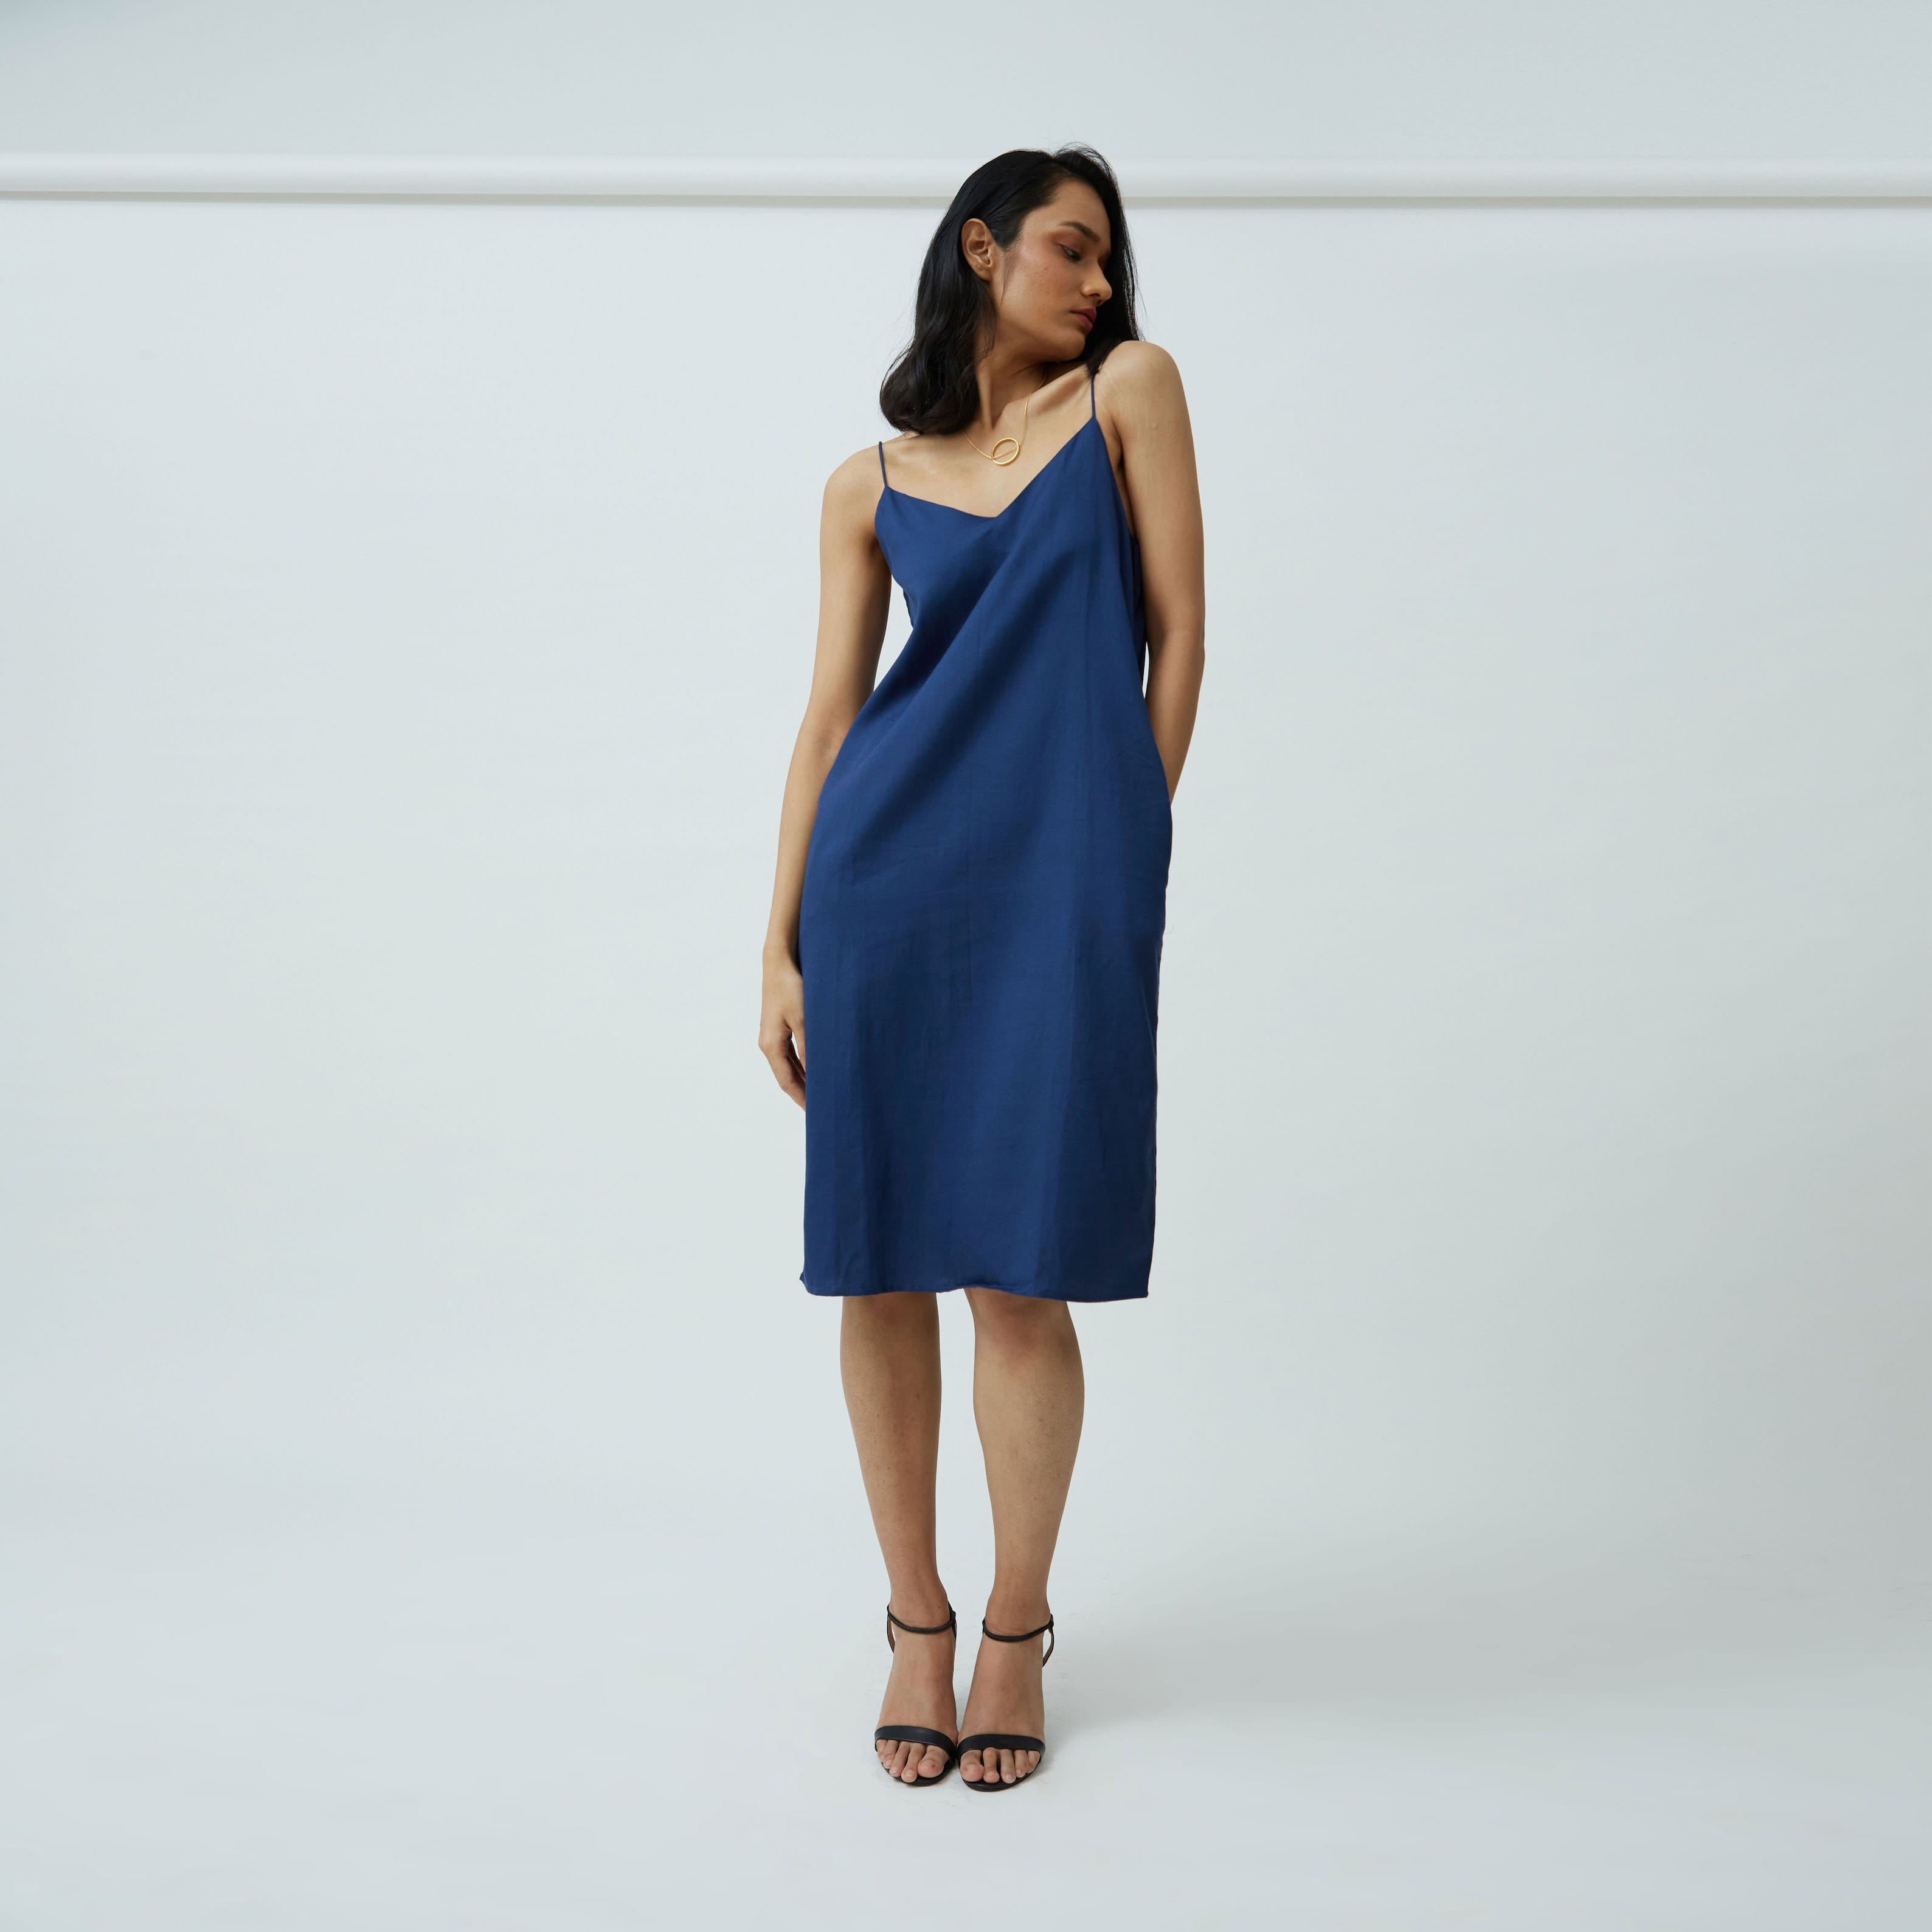 Saltpetre womens wear, indo-western slip dress in Indigo blue for semi formal, casual, occassional wear.
 Comfortably elegant dress in indigo blue colour with delicate straps, back slit and side pockets.